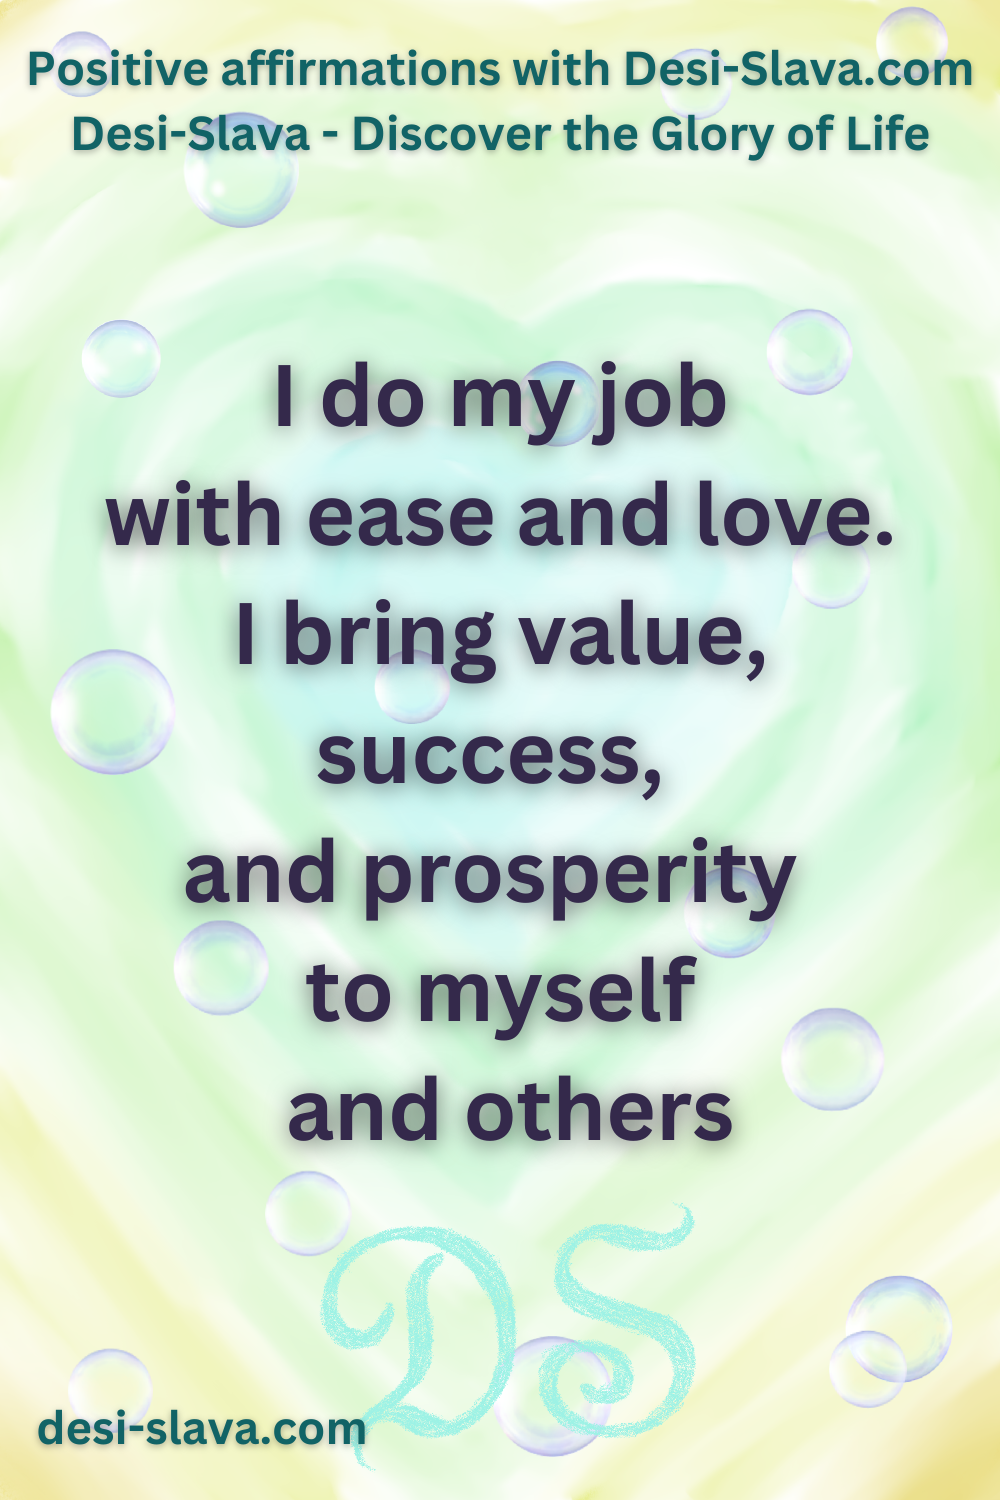 Attract Job Success – See Your Work as Valuable